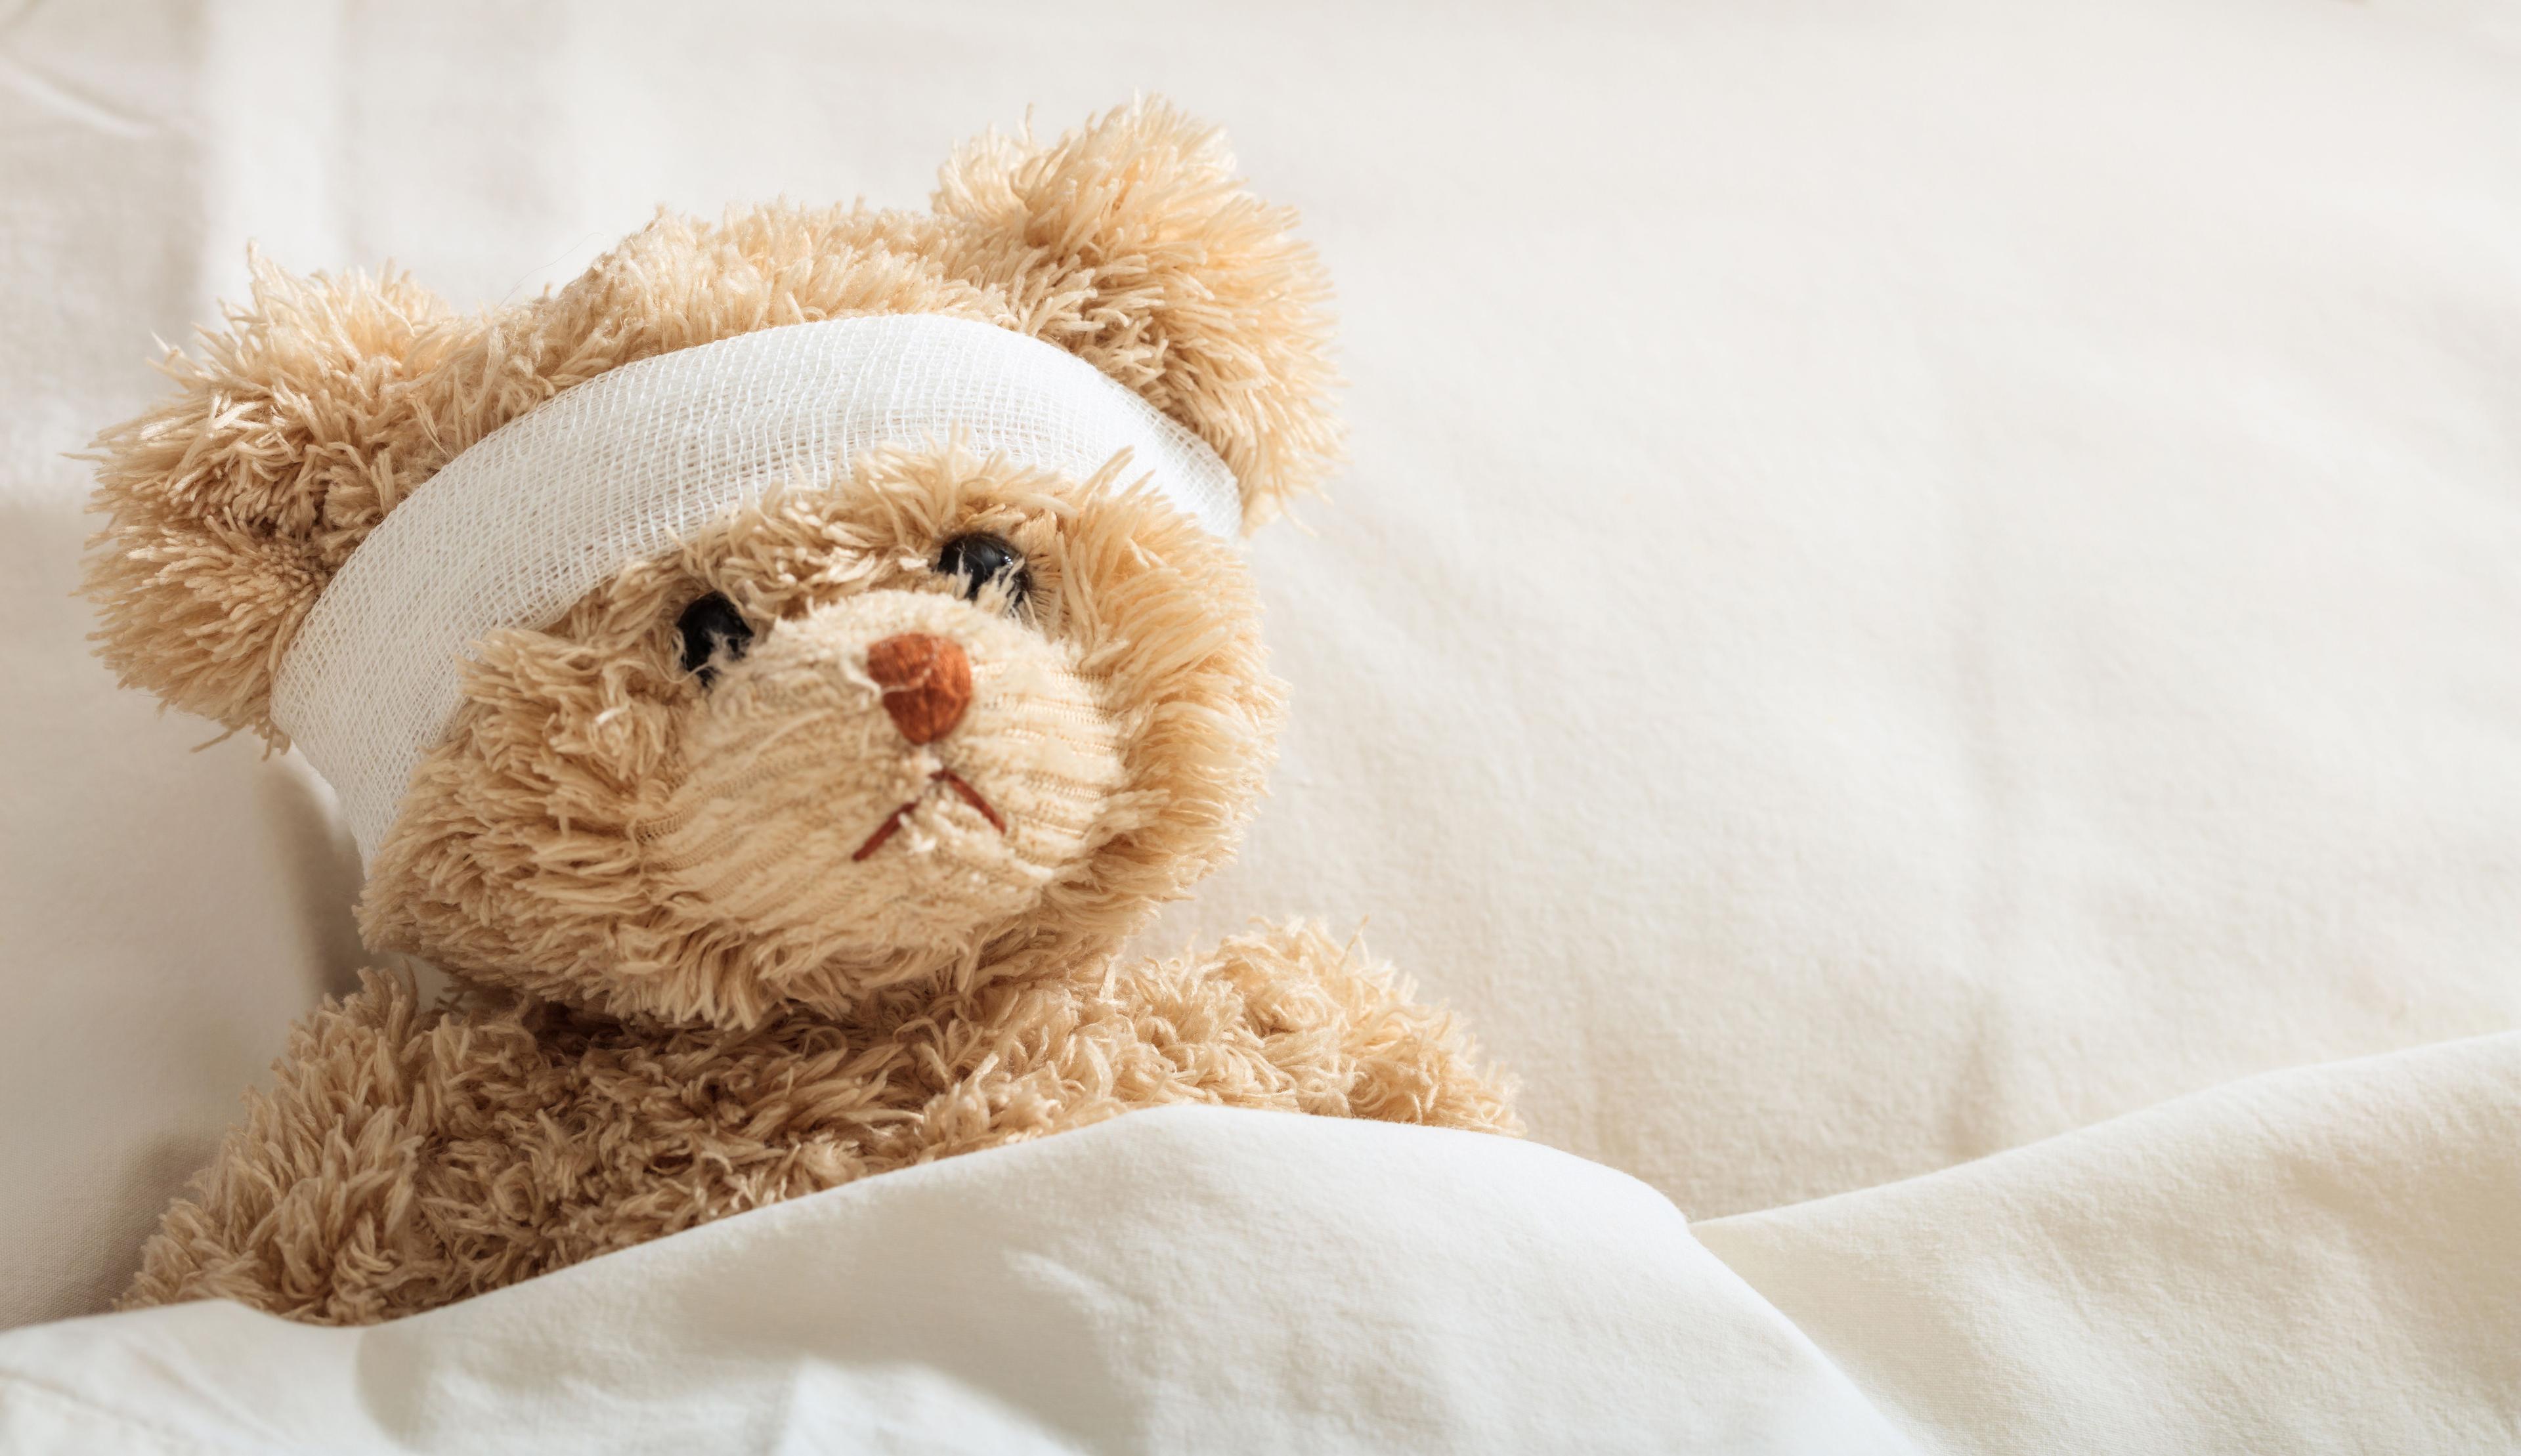 Teddy bear with a bandage wrapped around its head is lying in bed.